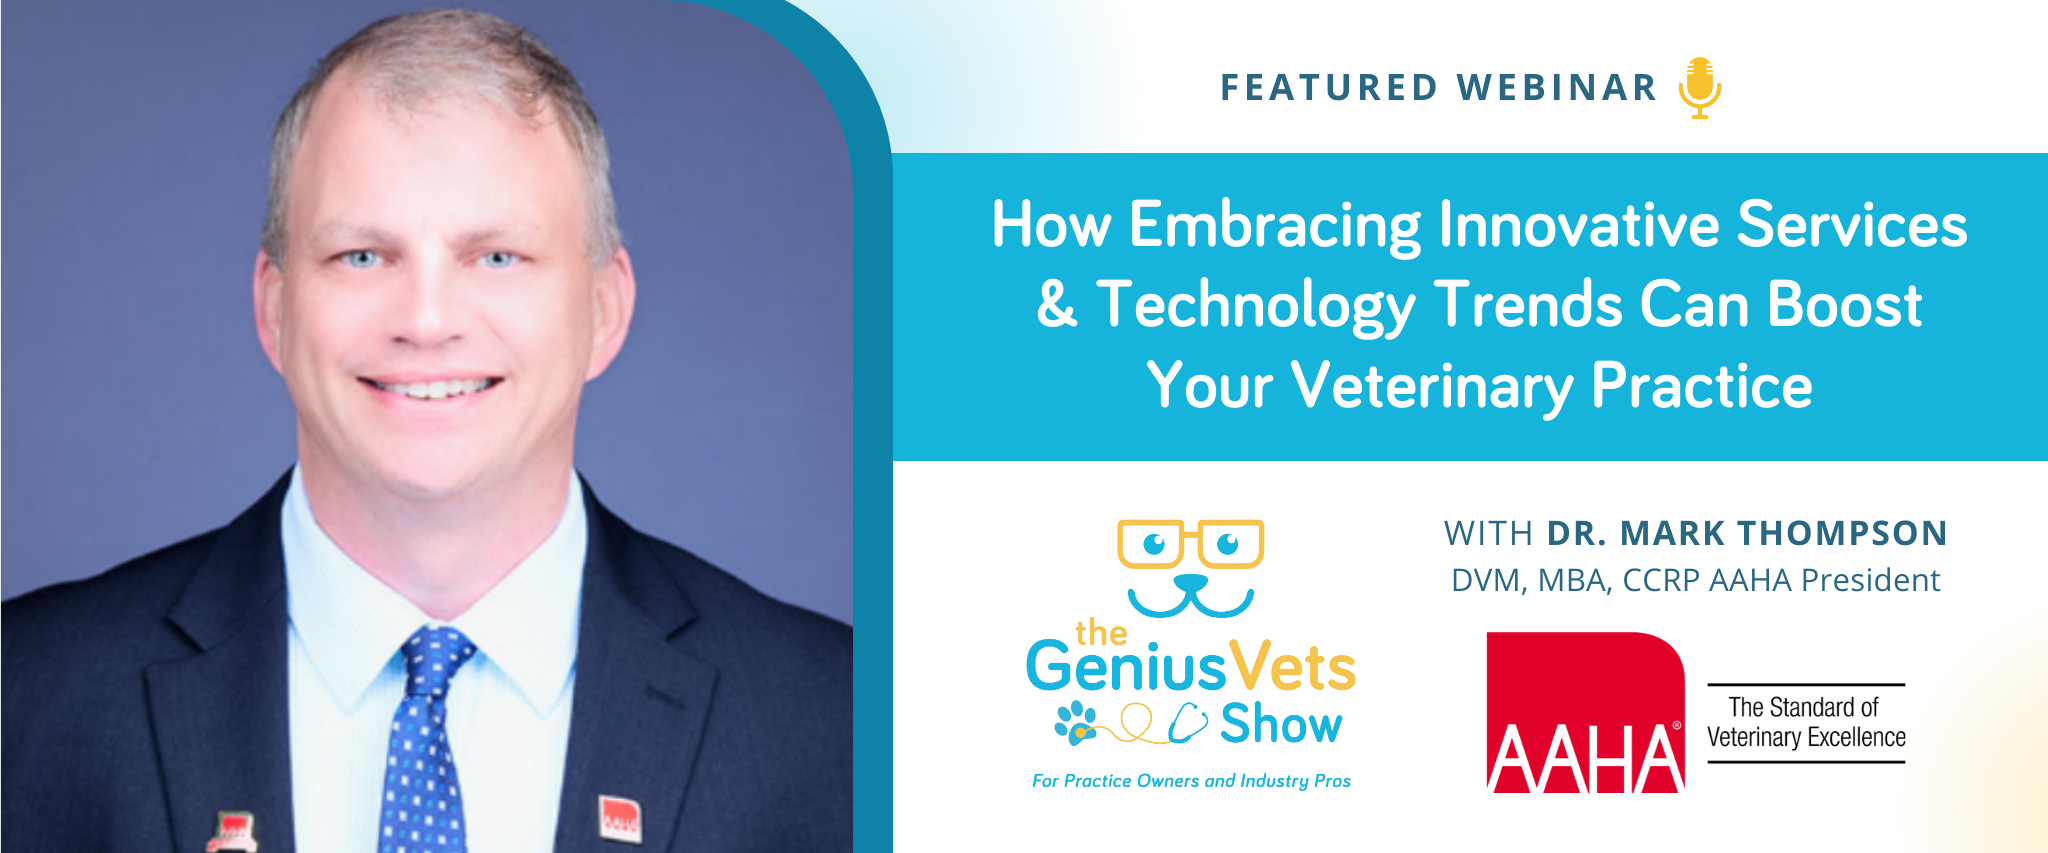 The GeniusVets Show with Dr. Mark Thompson